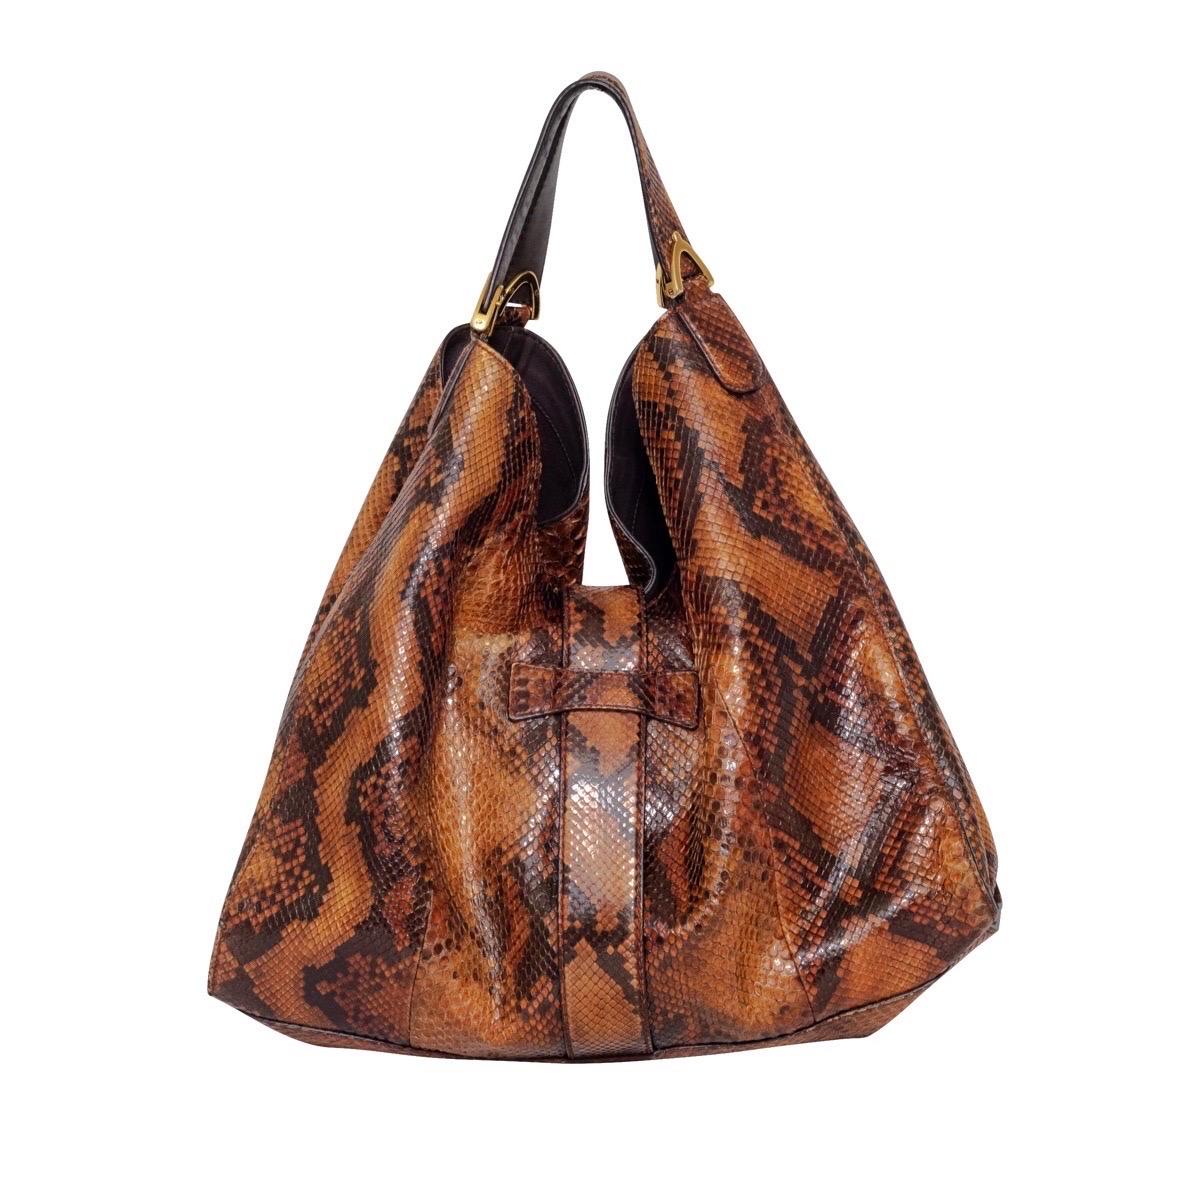 Gucci Large Brown Python Soft Stirrup Bag

Brown
Snakeskin/Python
Gold-tone hardware
Open-top with weighted stirrup strap accent
Top handle; fits on shoulder
Dual strap with stirrup accents on each strap
Brown suede lining with zipper and interior